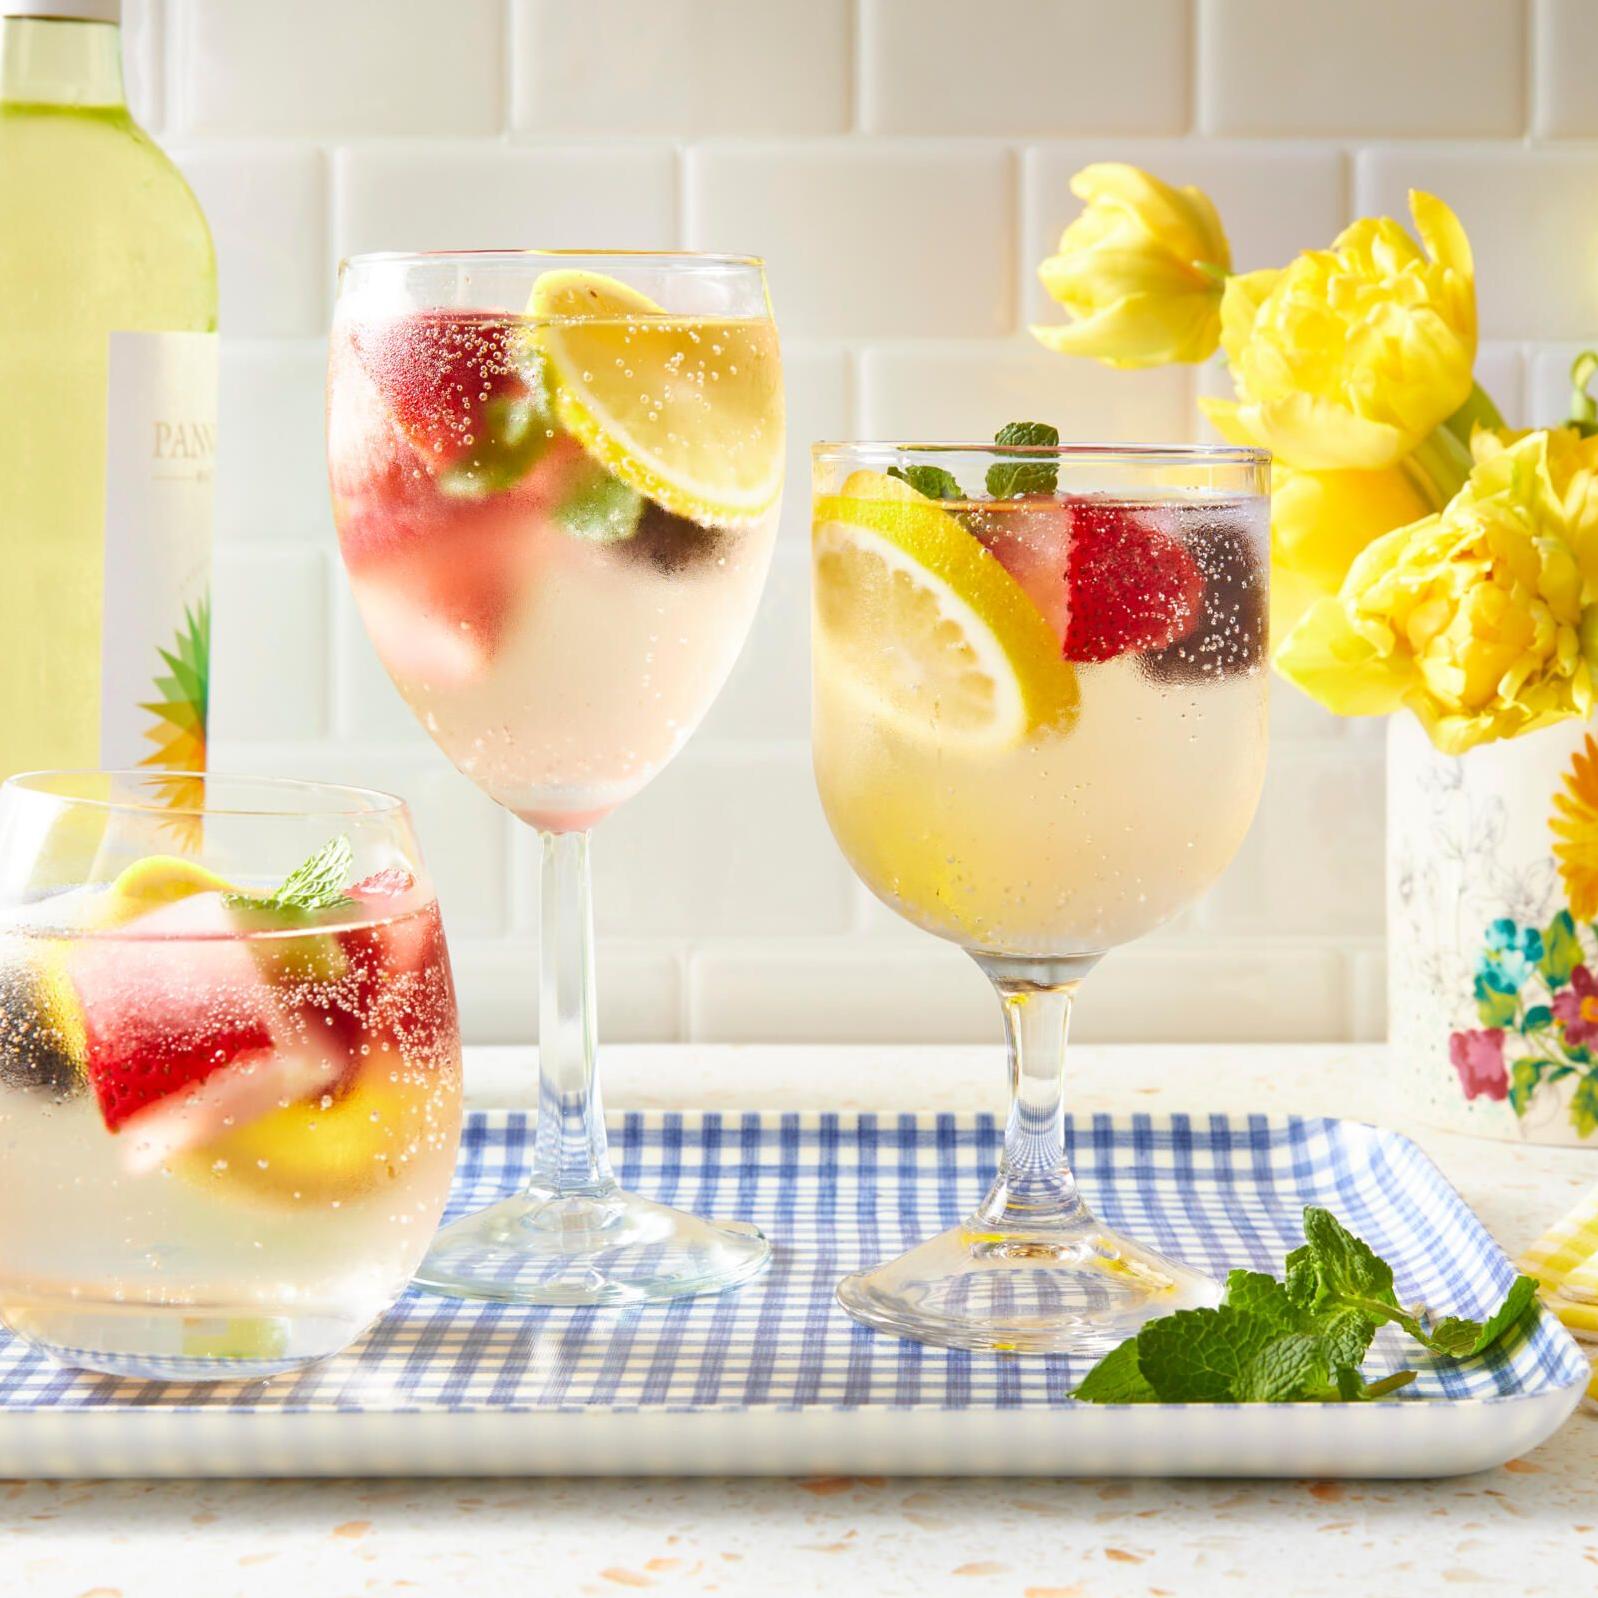  A refreshing drink to sip on a summer day